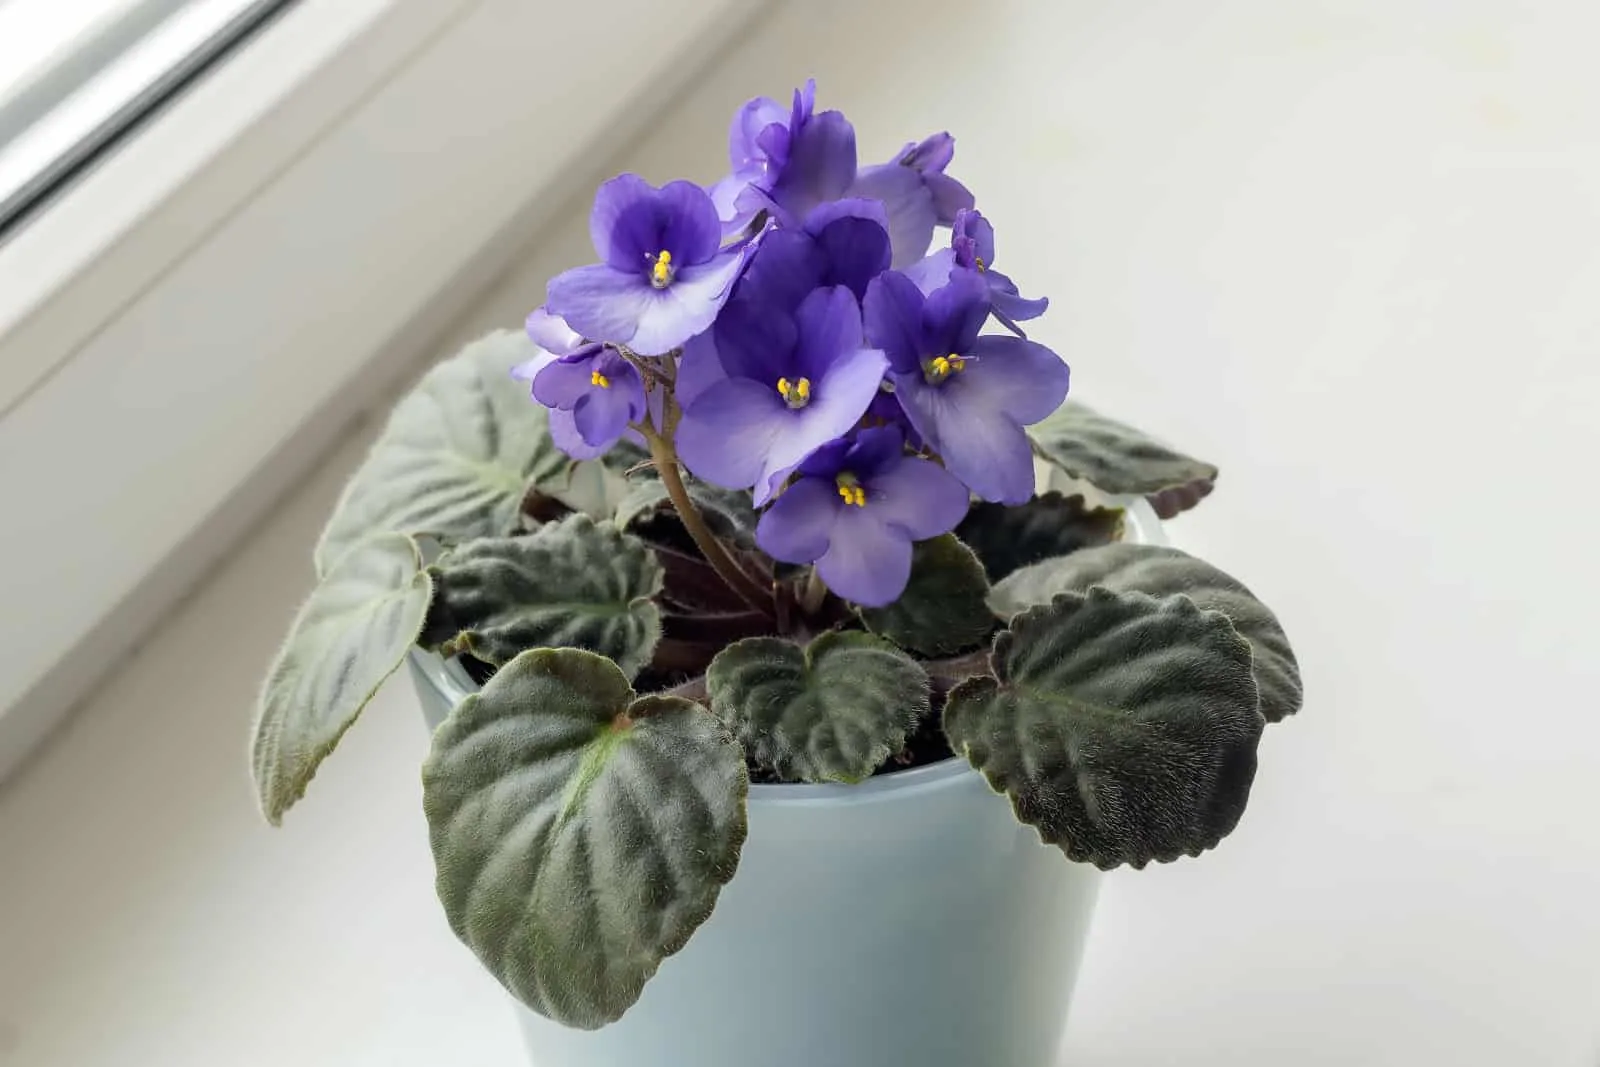 Blooming blue violet (saintpaulia) in a plastic pot on a home windowsill.